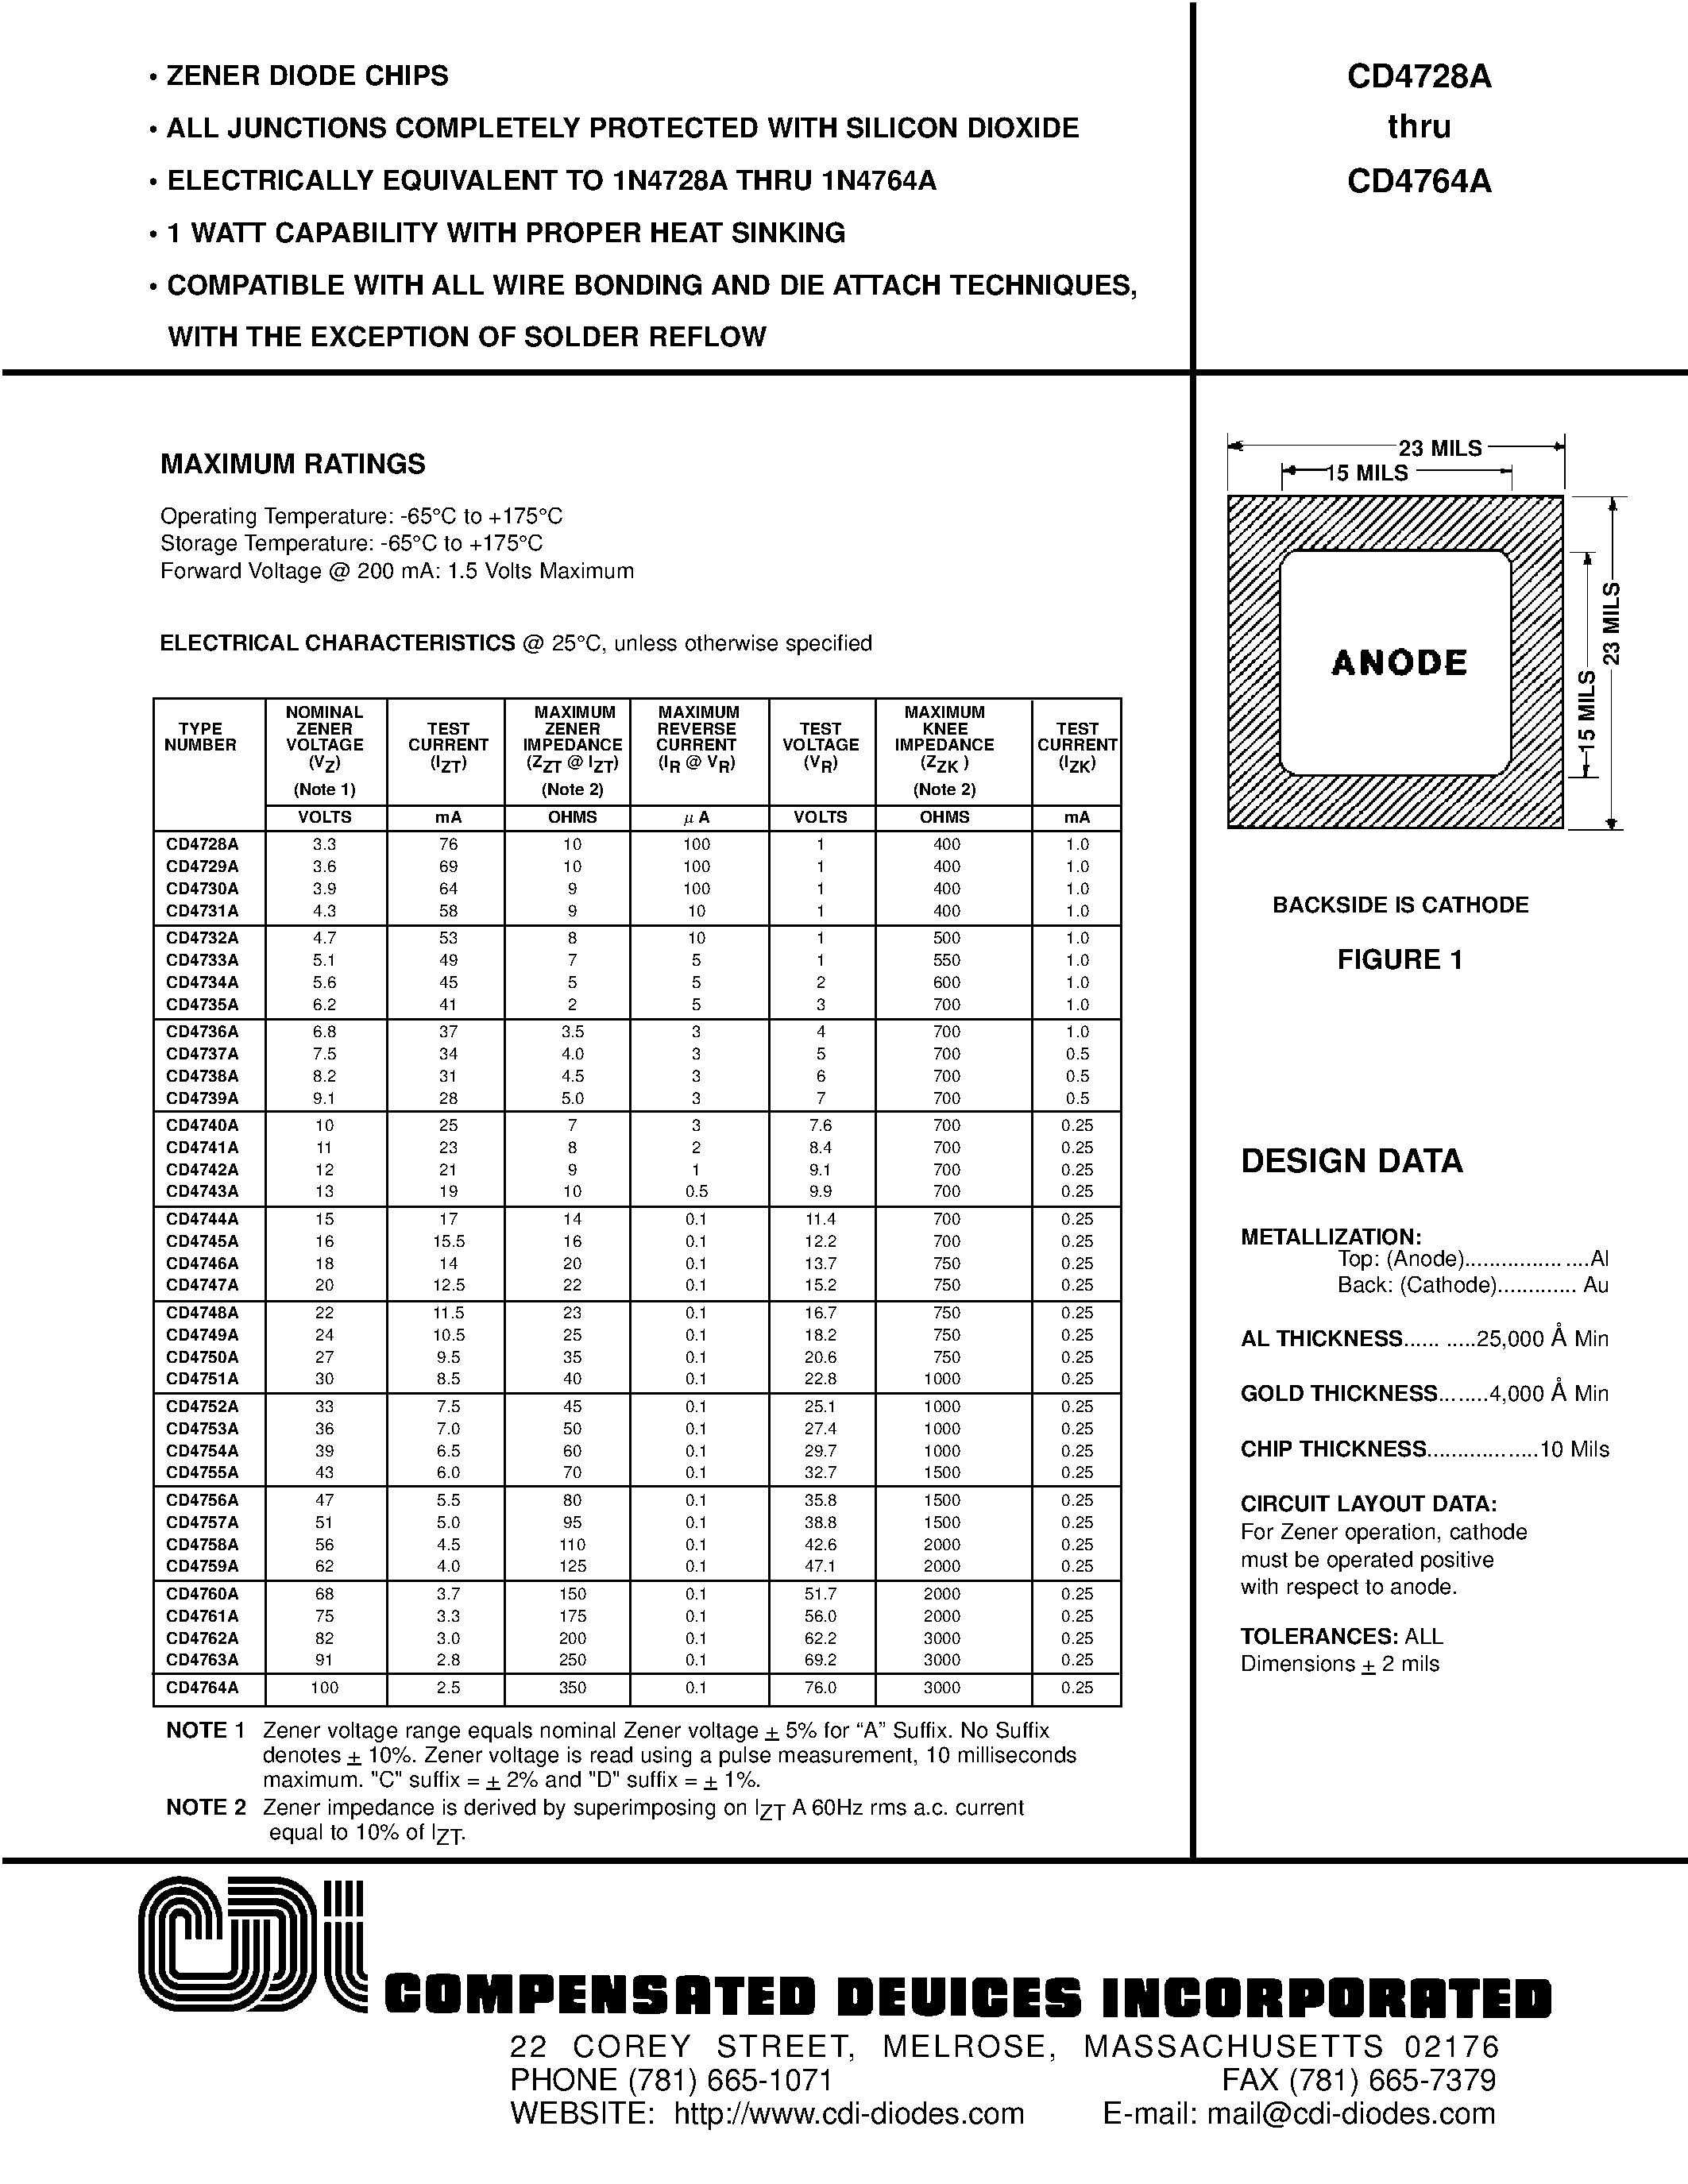 Datasheet CD4759A - ZENER DIODE CHIPS page 1